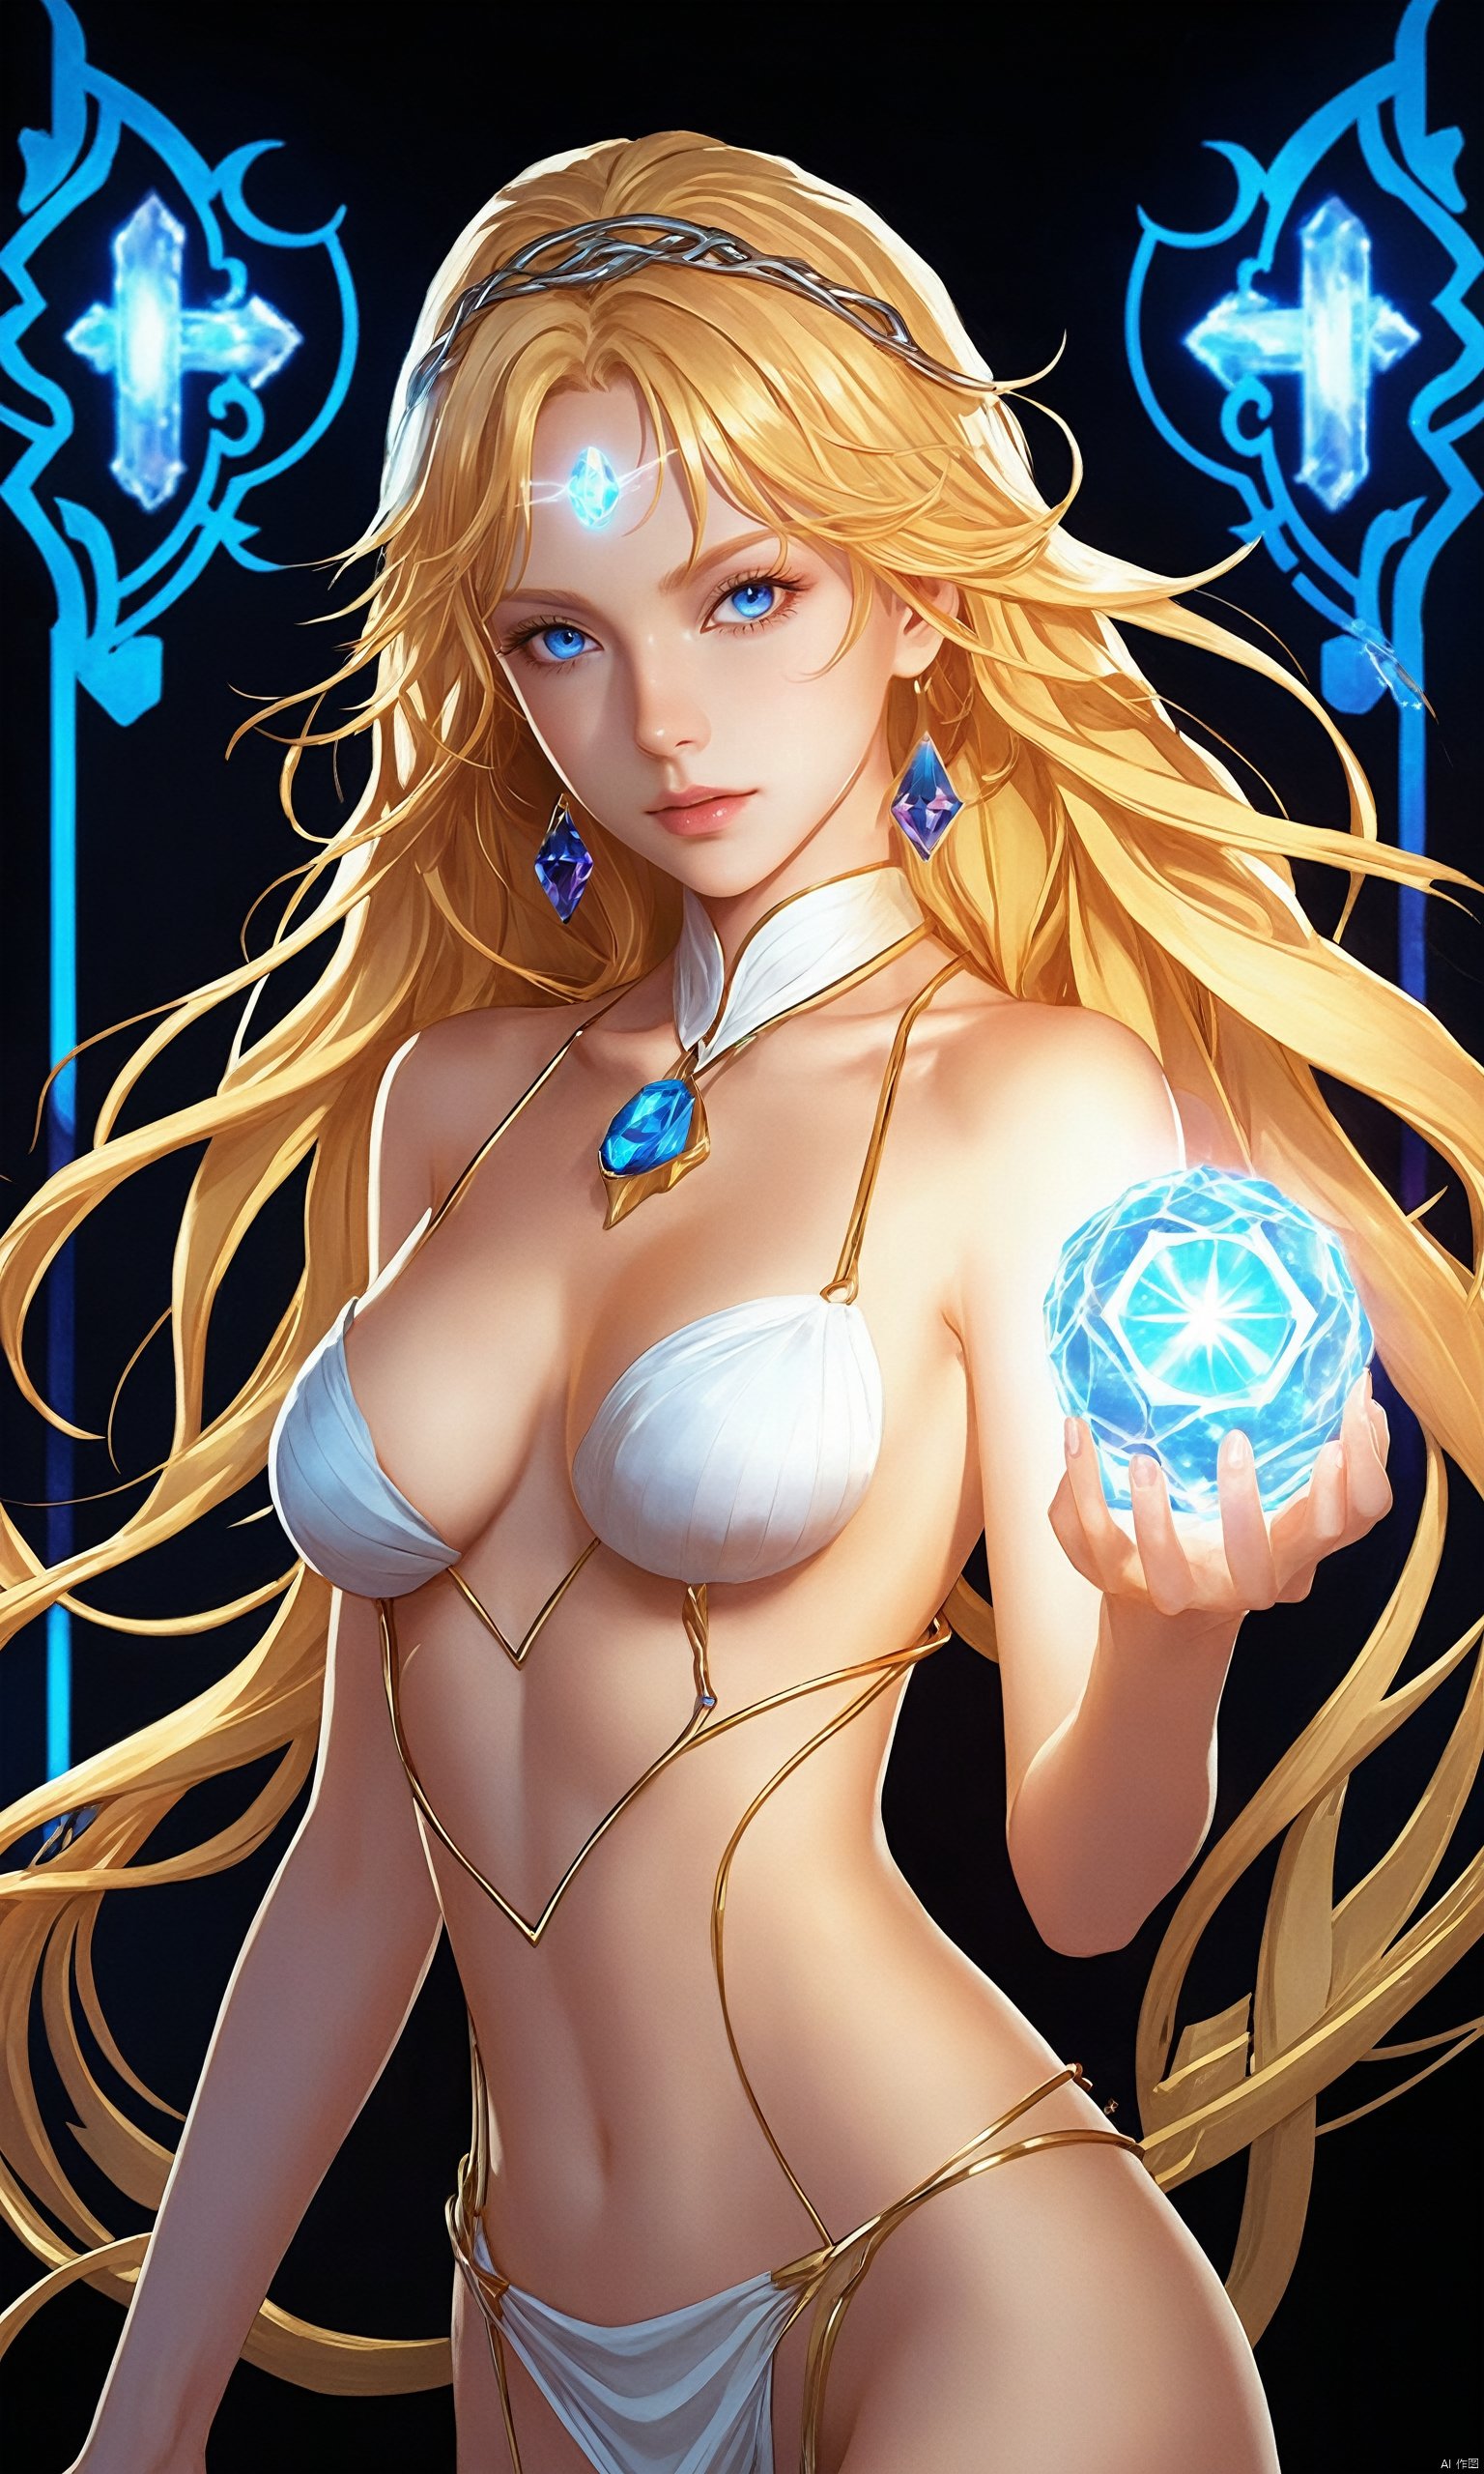 (flat anime style illustration:1.4) of a stunningly beautiful naked 19-year-old wizard girl, blue eyes, costume makeup , golden blonde tousled waves hair, insecurity, holding a gemstone infused with power, summoning its energy, neon lighting, vibrant, colorful lights adding a modern and edgy touch to romantic scenes, in front of a gate carved with mystical runes, humming with arcane energy and guarded by magical beings, artwork by hentai anime studio